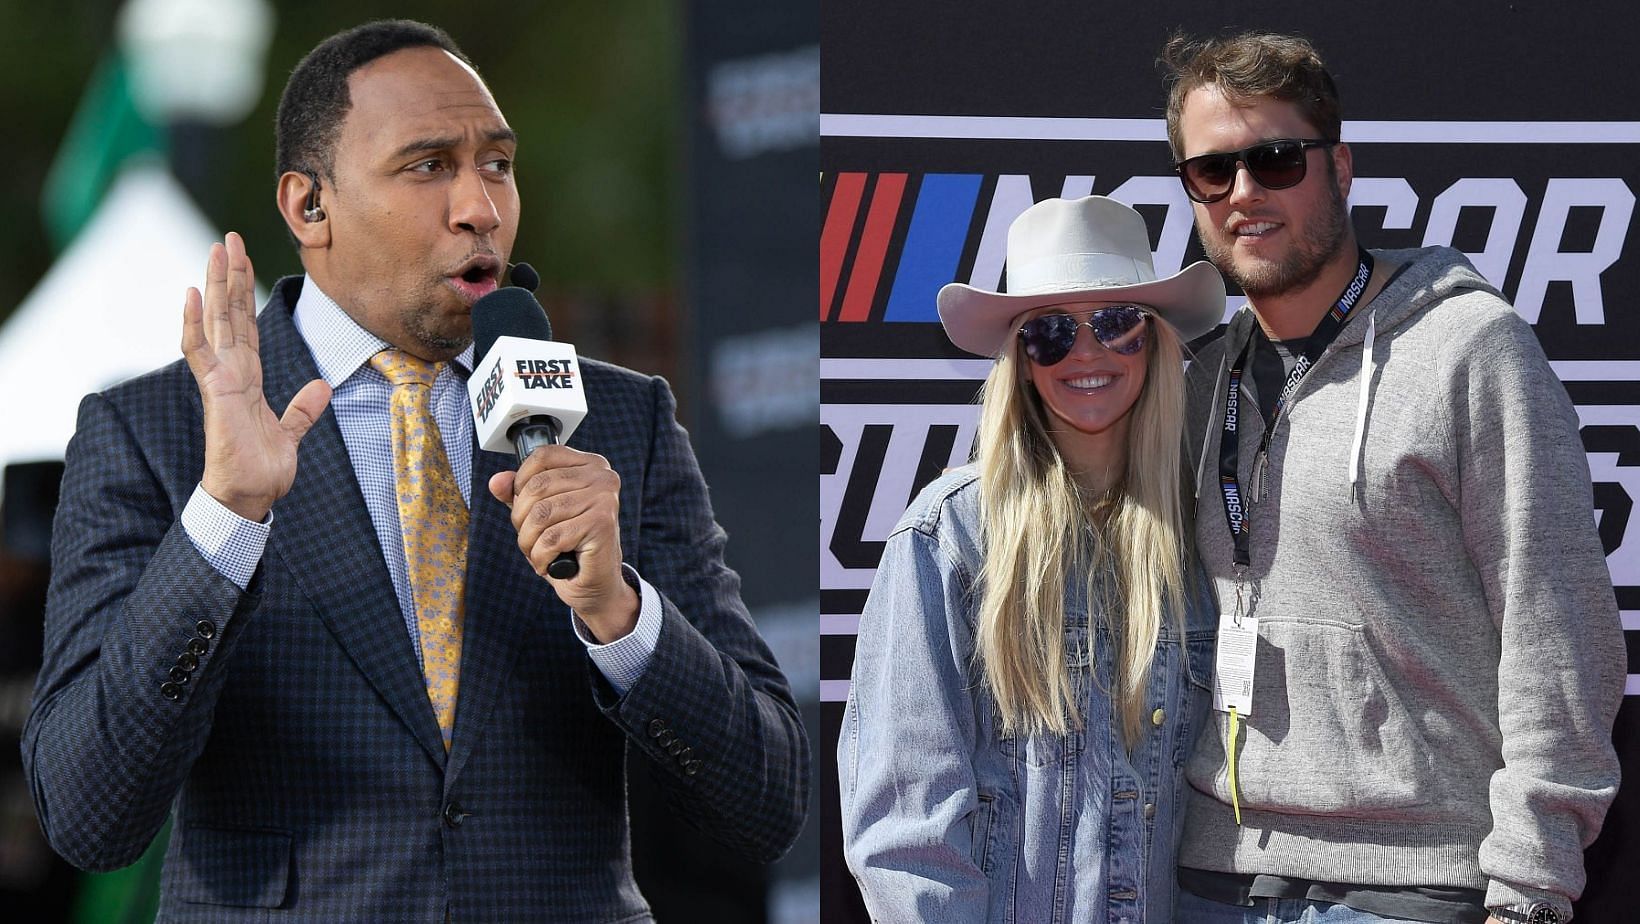 Stephen A. Smith calls out Matthew Stafford